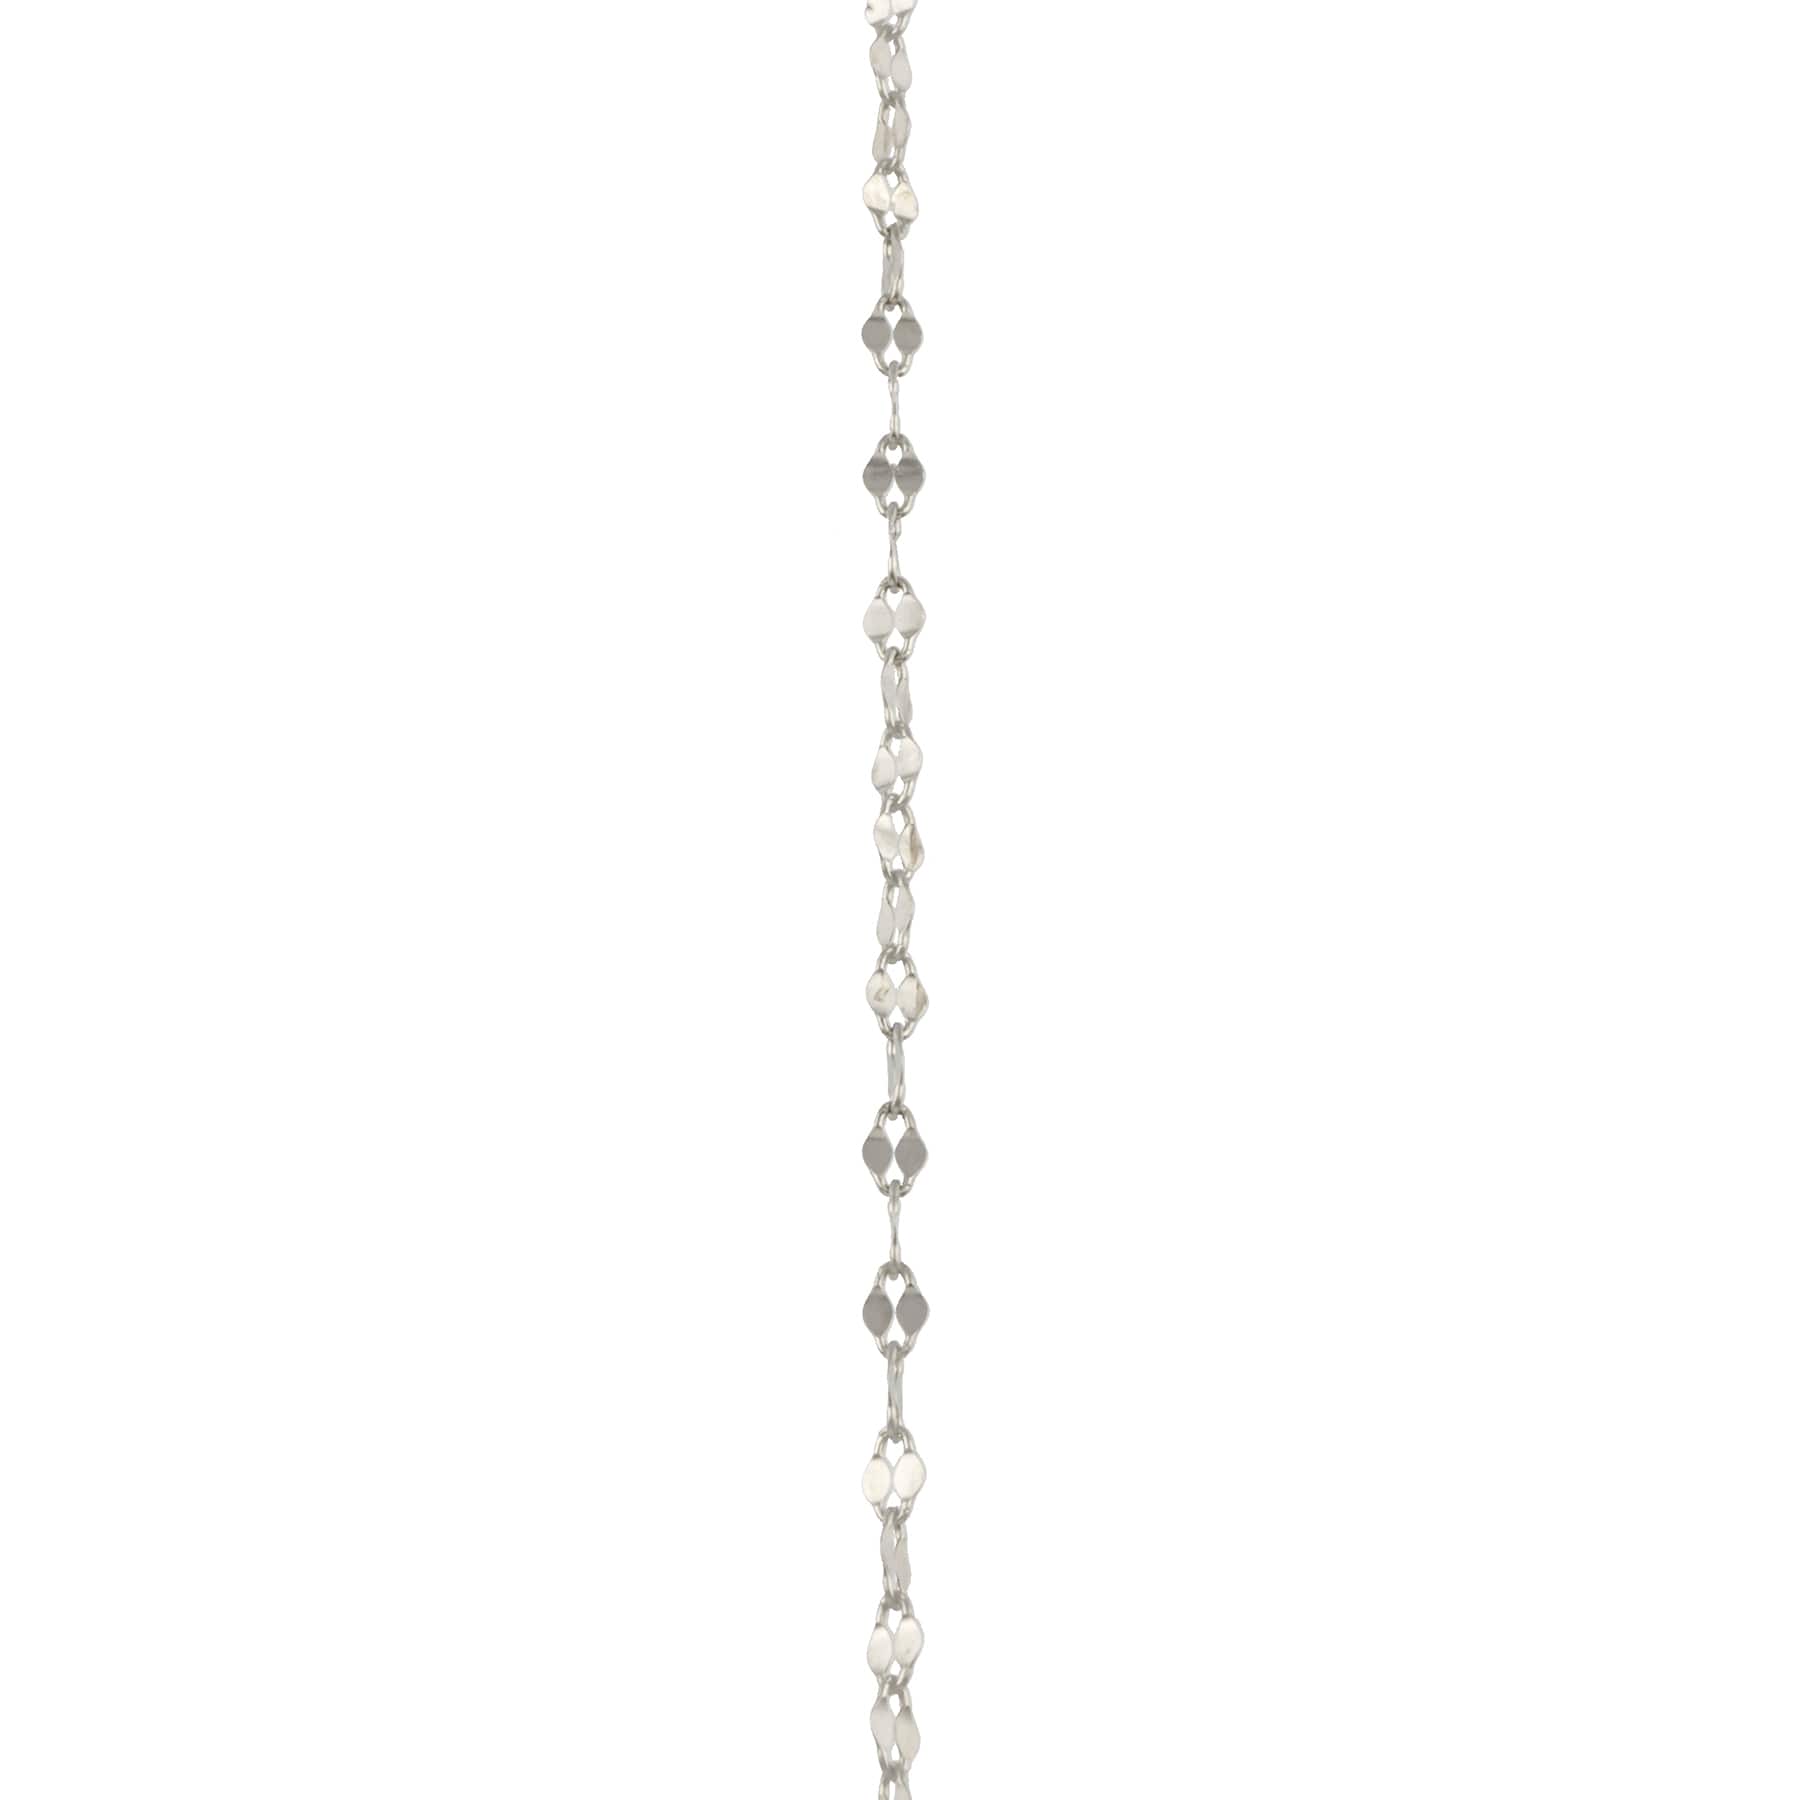 Silver Beaded Chain - 30 Inches - Replacement Chain - Agent Gear USA